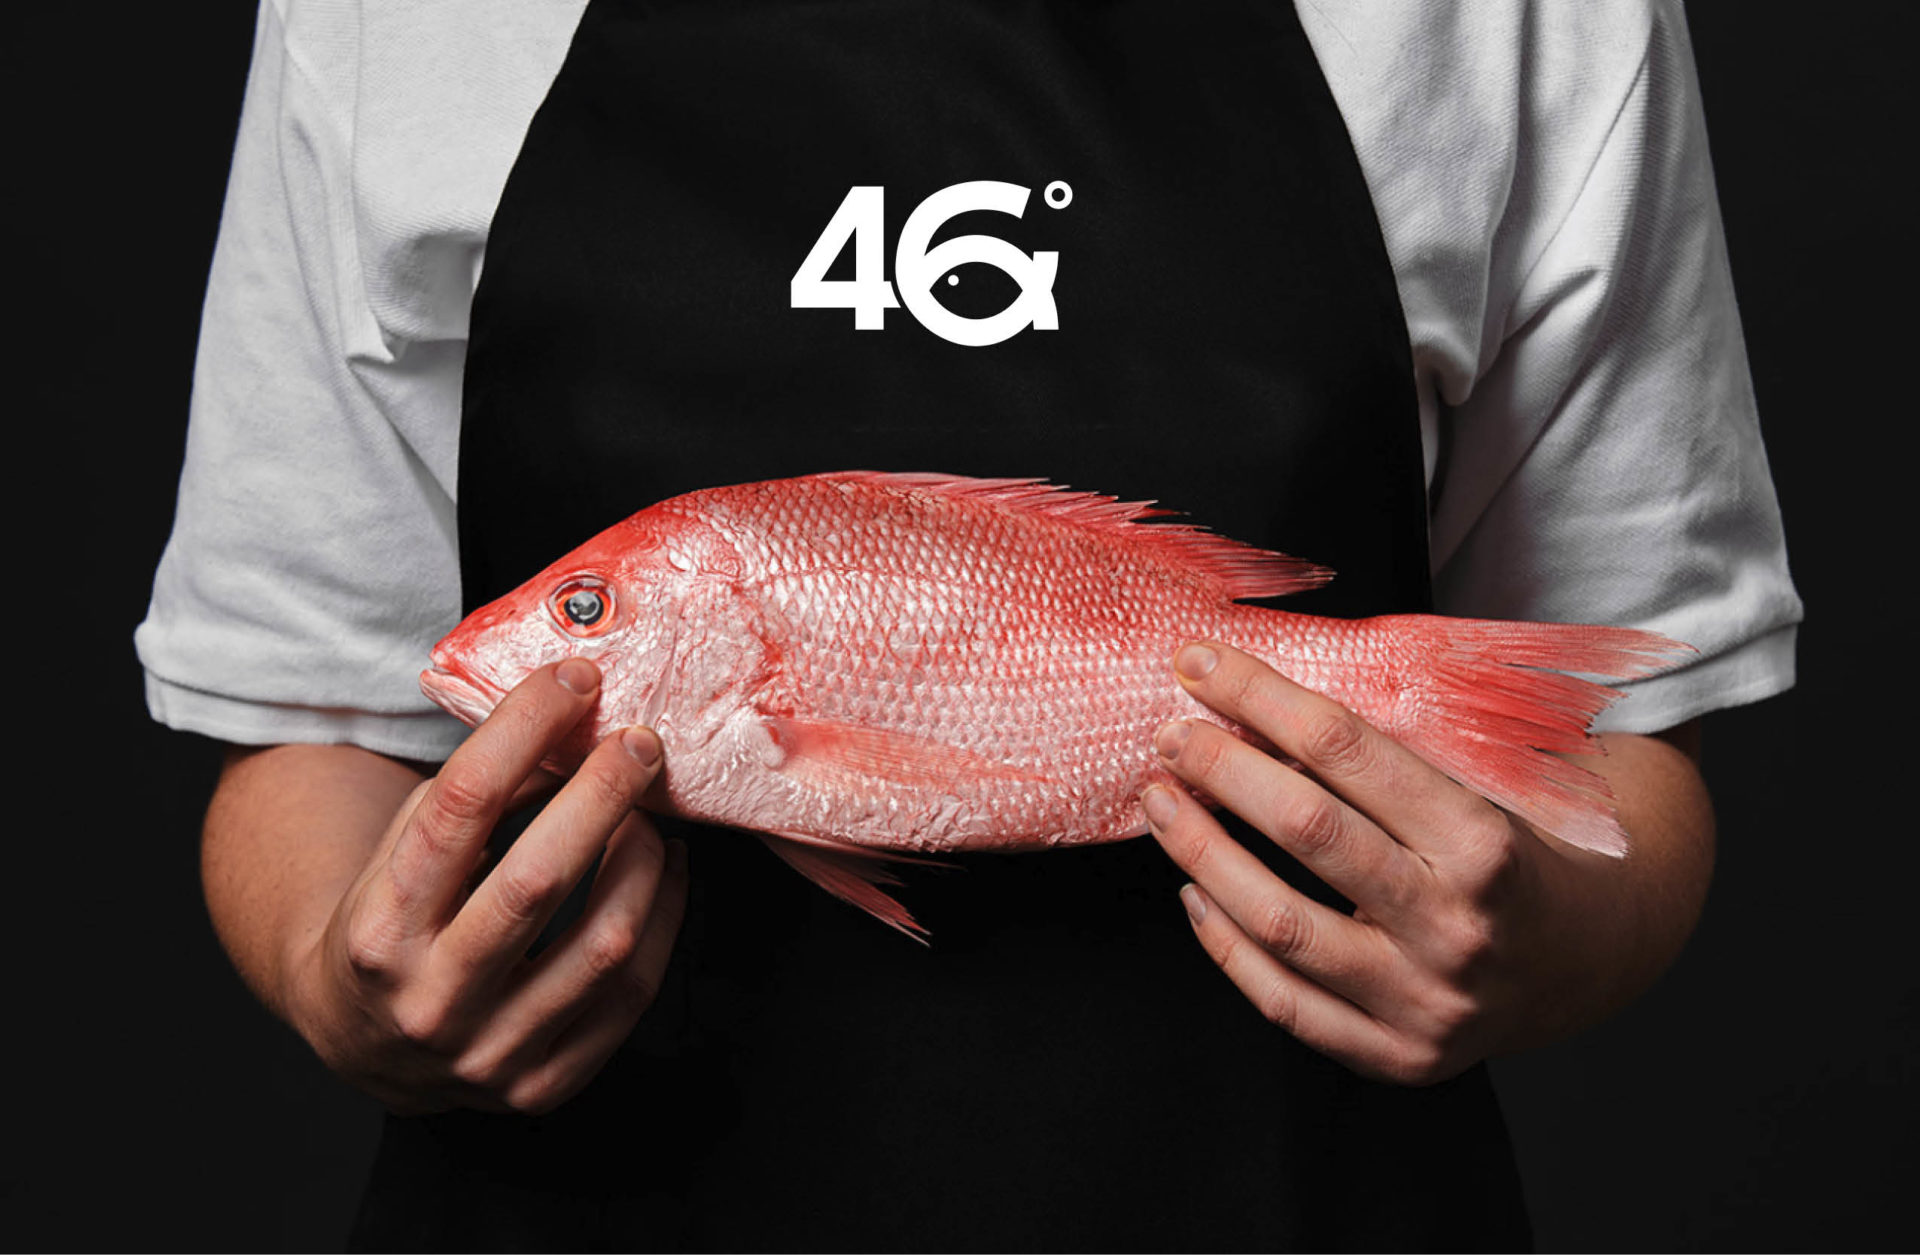 Person with 46 south apron holding red fish